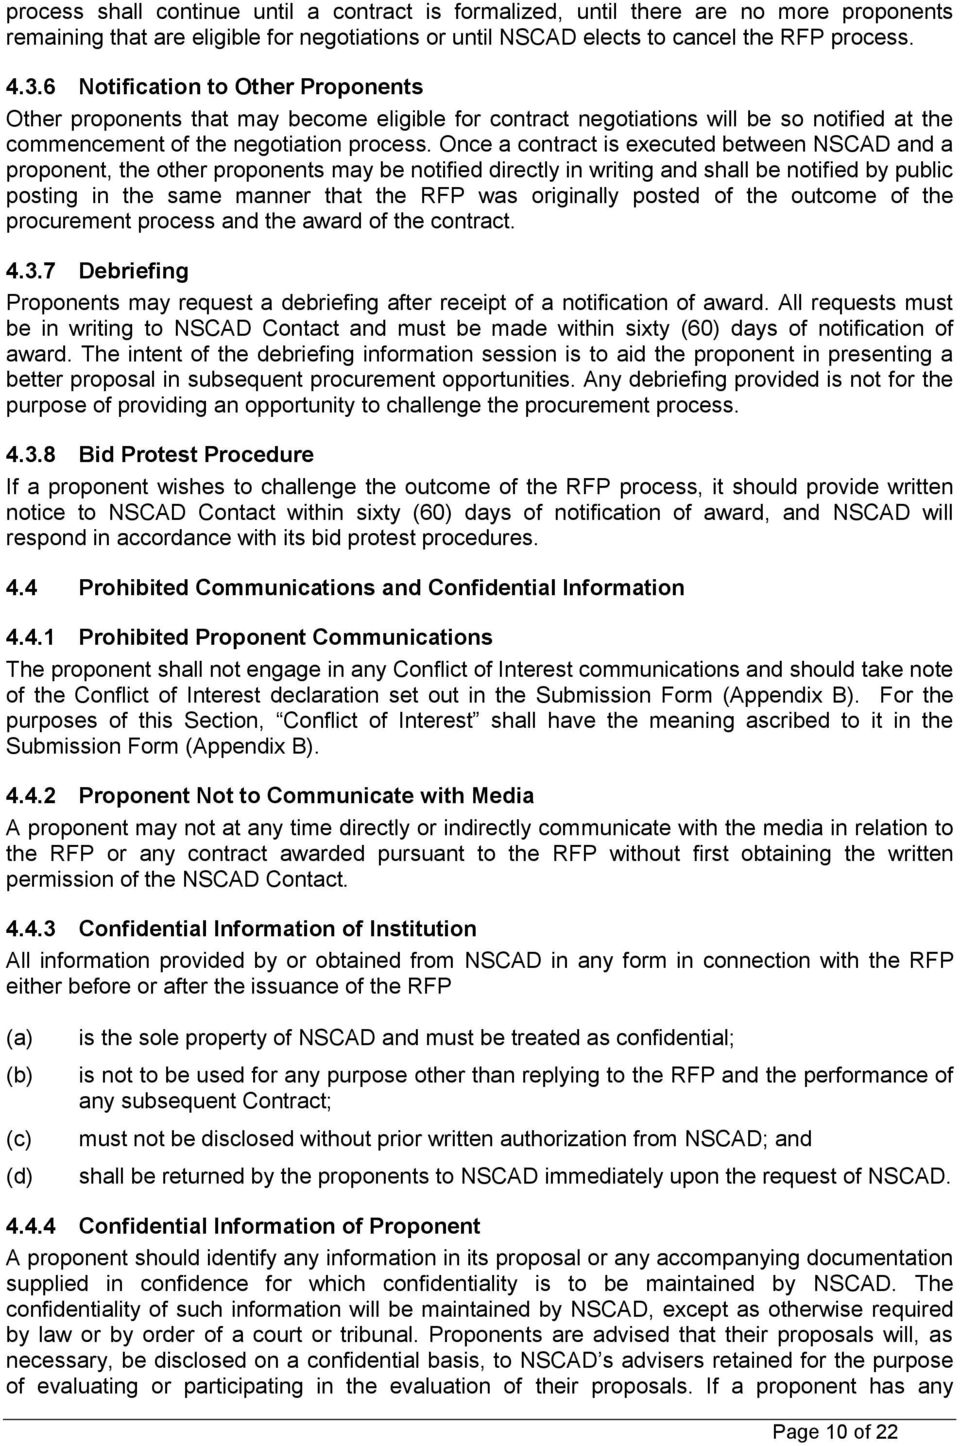 Once a contract is executed between NSCAD and a proponent, the other proponents may be notified directly in writing and shall be notified by public posting in the same manner that the RFP was